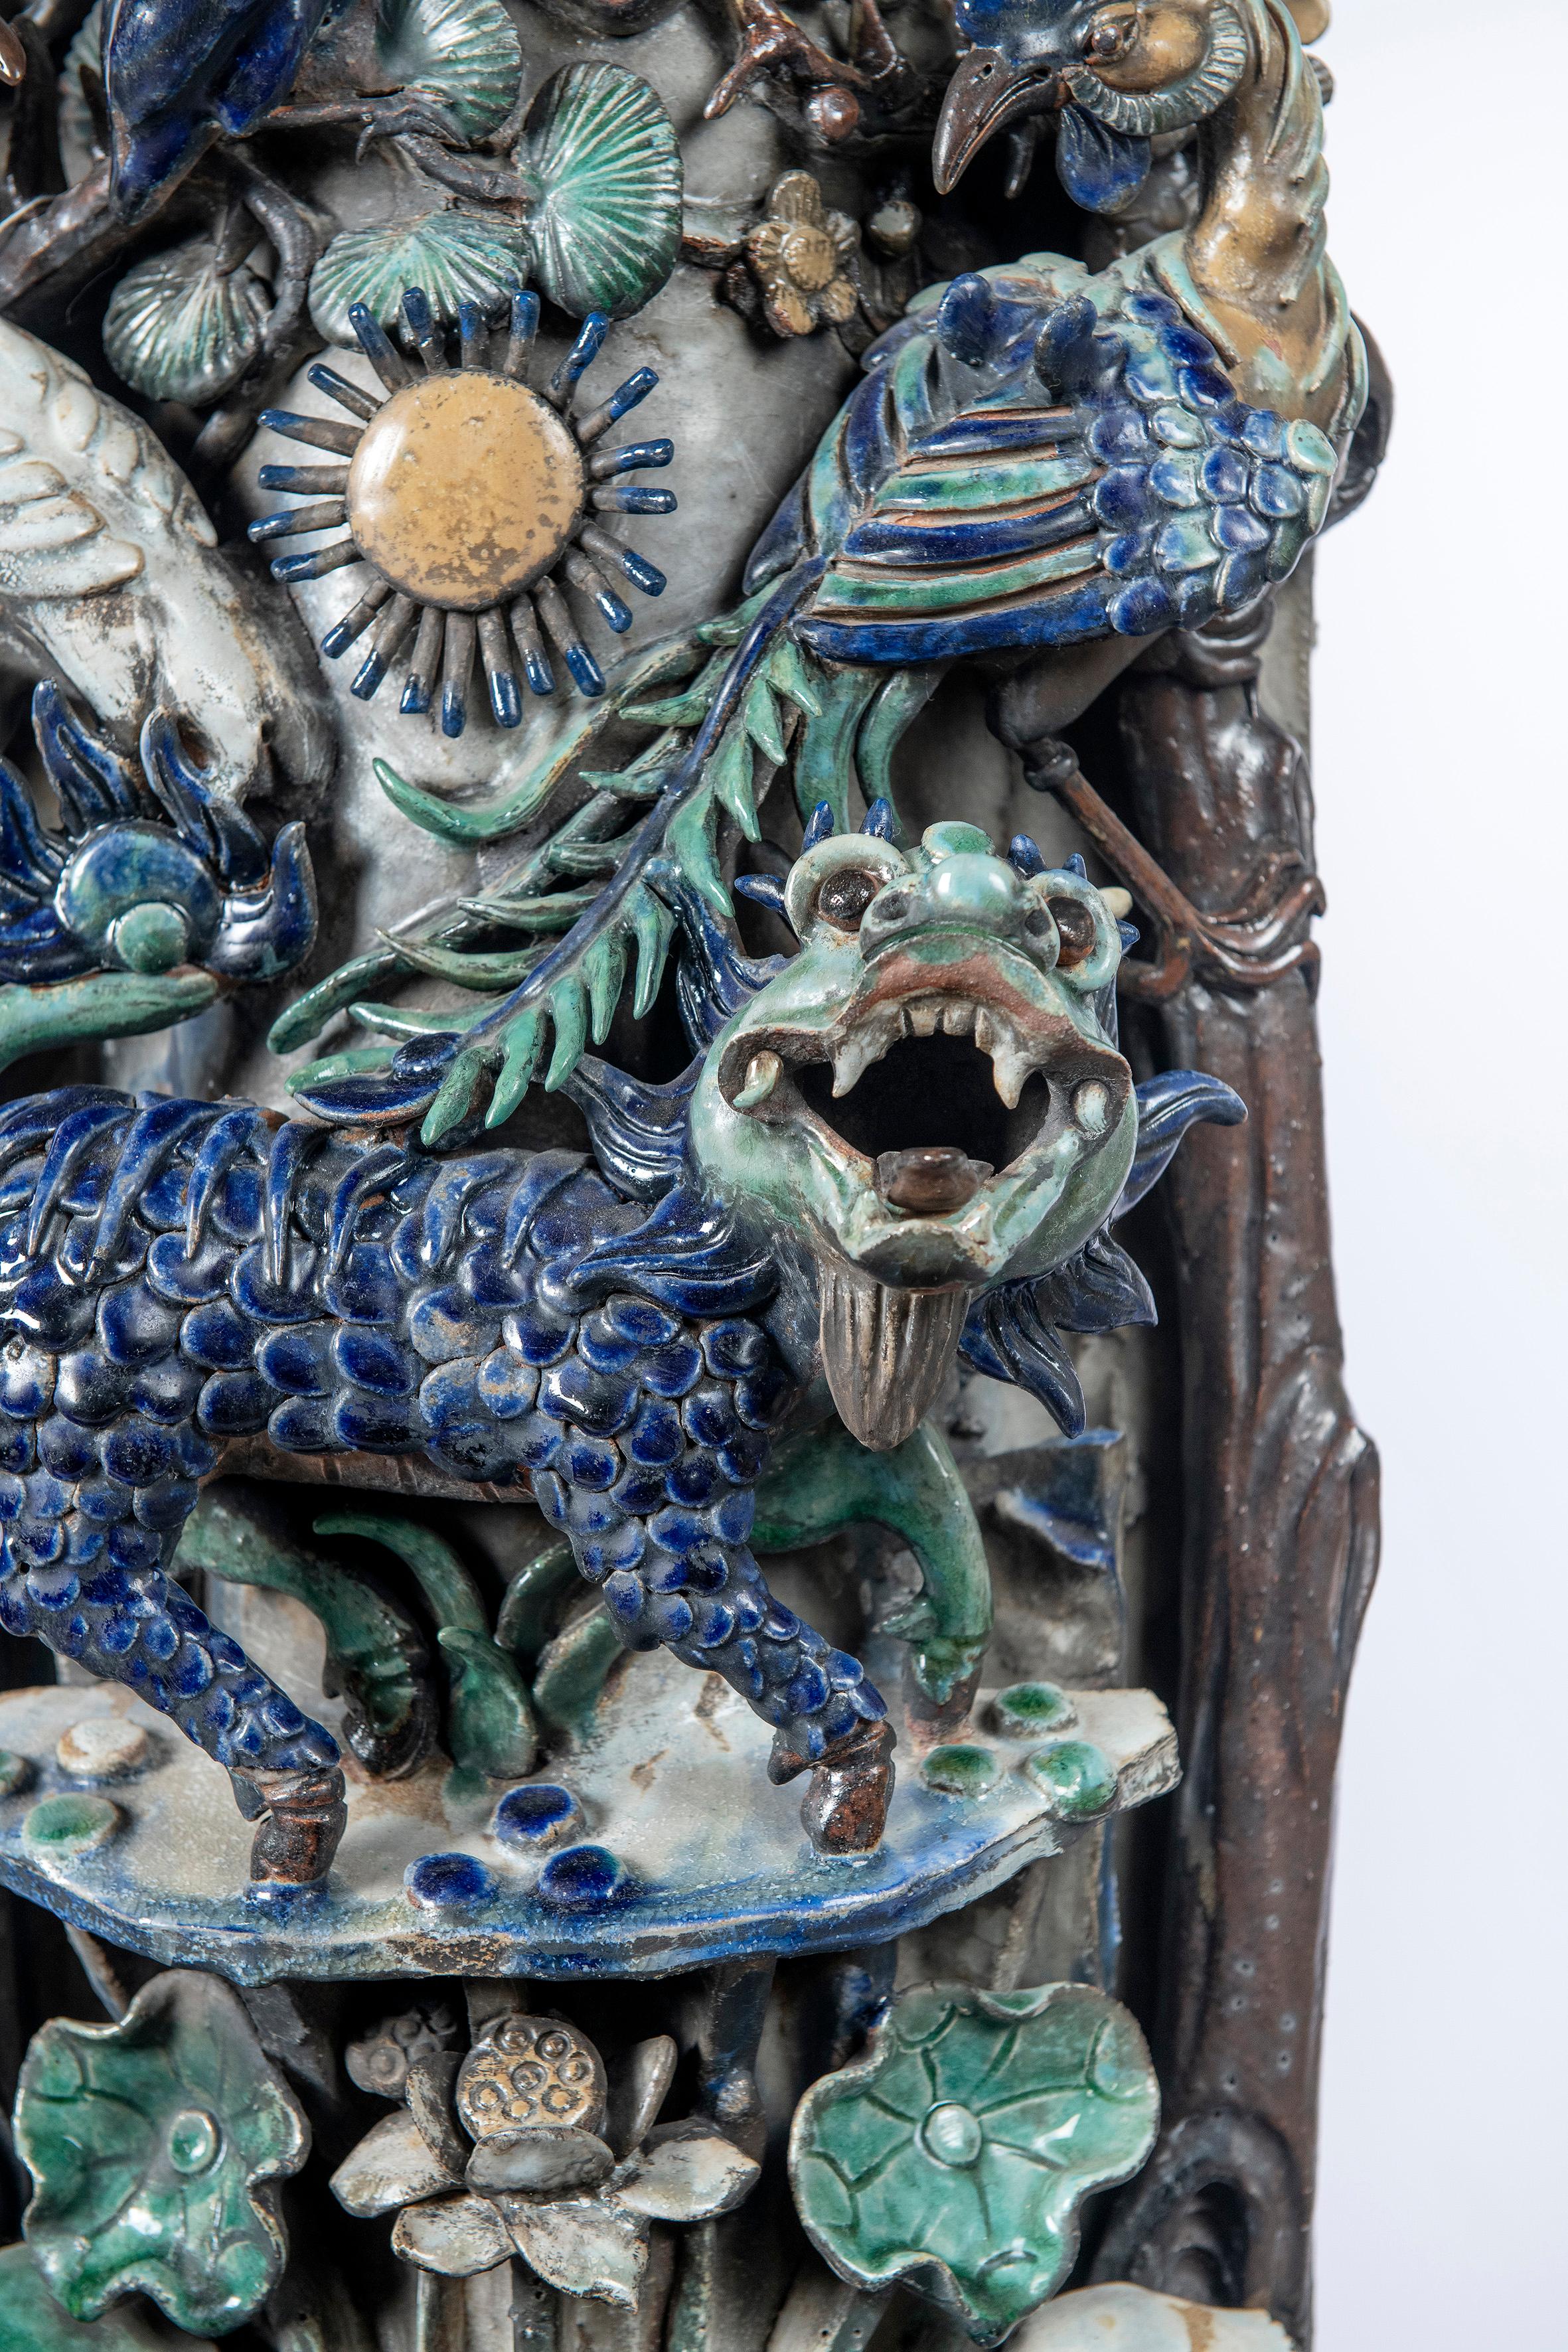 Chinese Export Pair of Glazed Ceramic Chinese Tiles, China, Early 20th Century For Sale